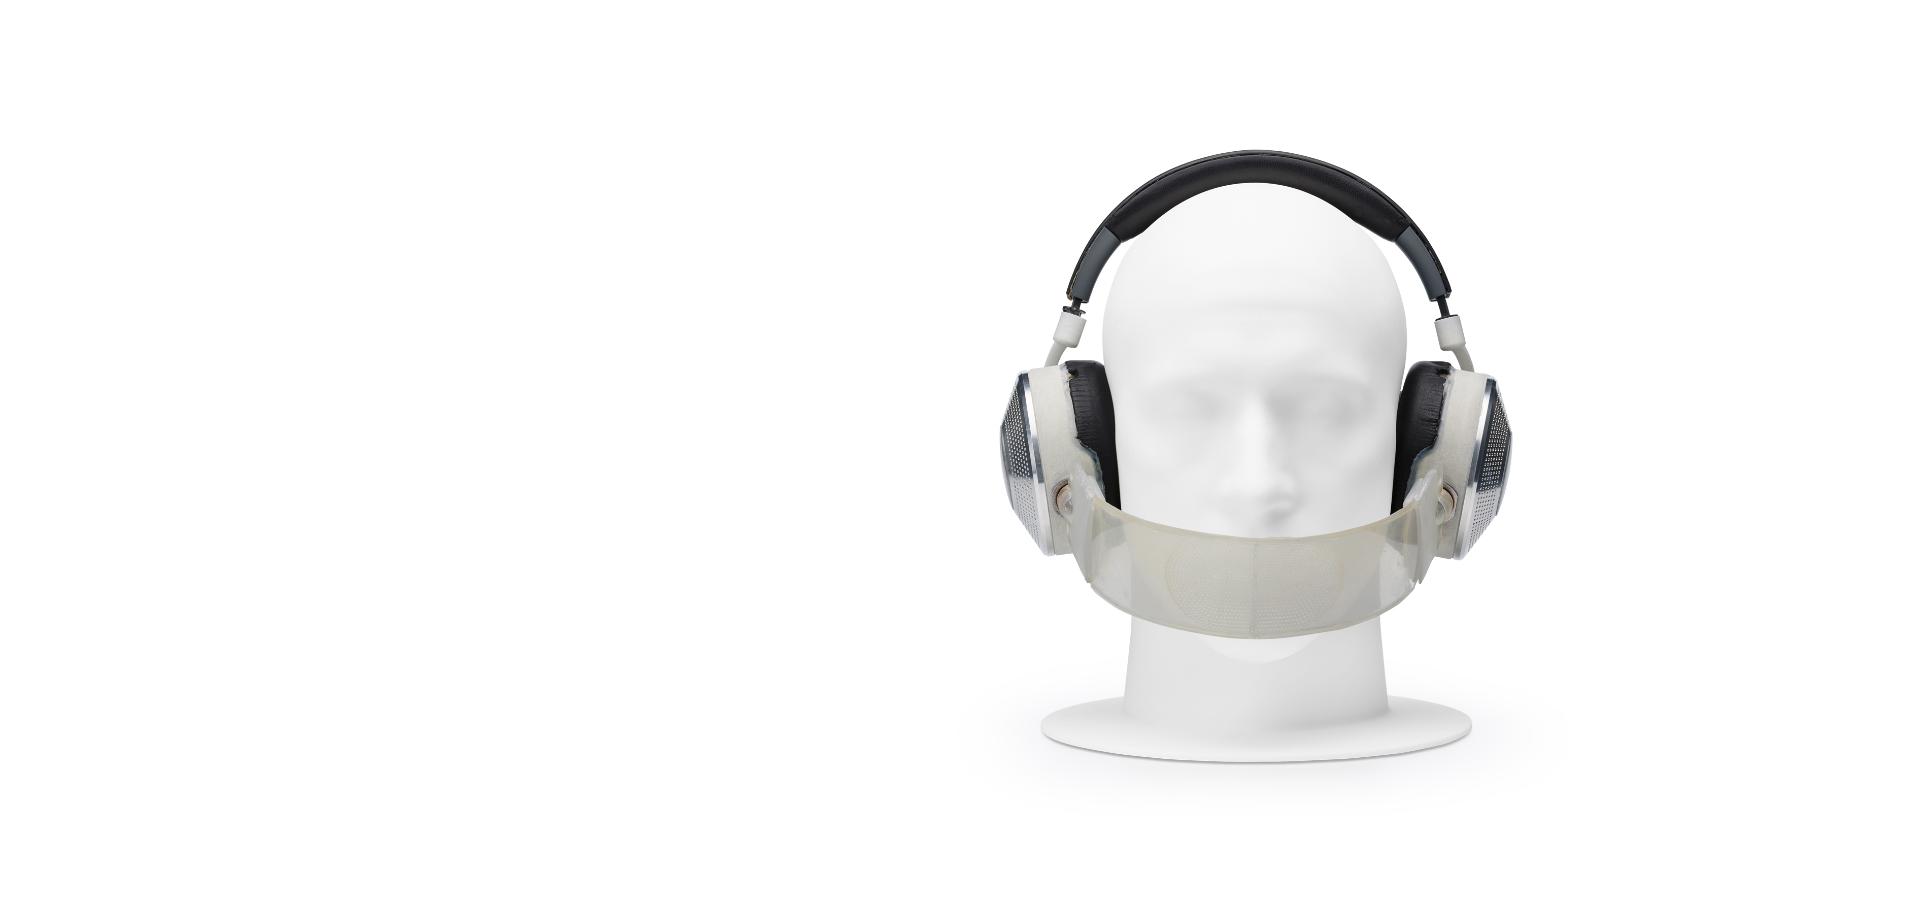 Mannequin head wearing prototype headphones, with band across nose and mouth